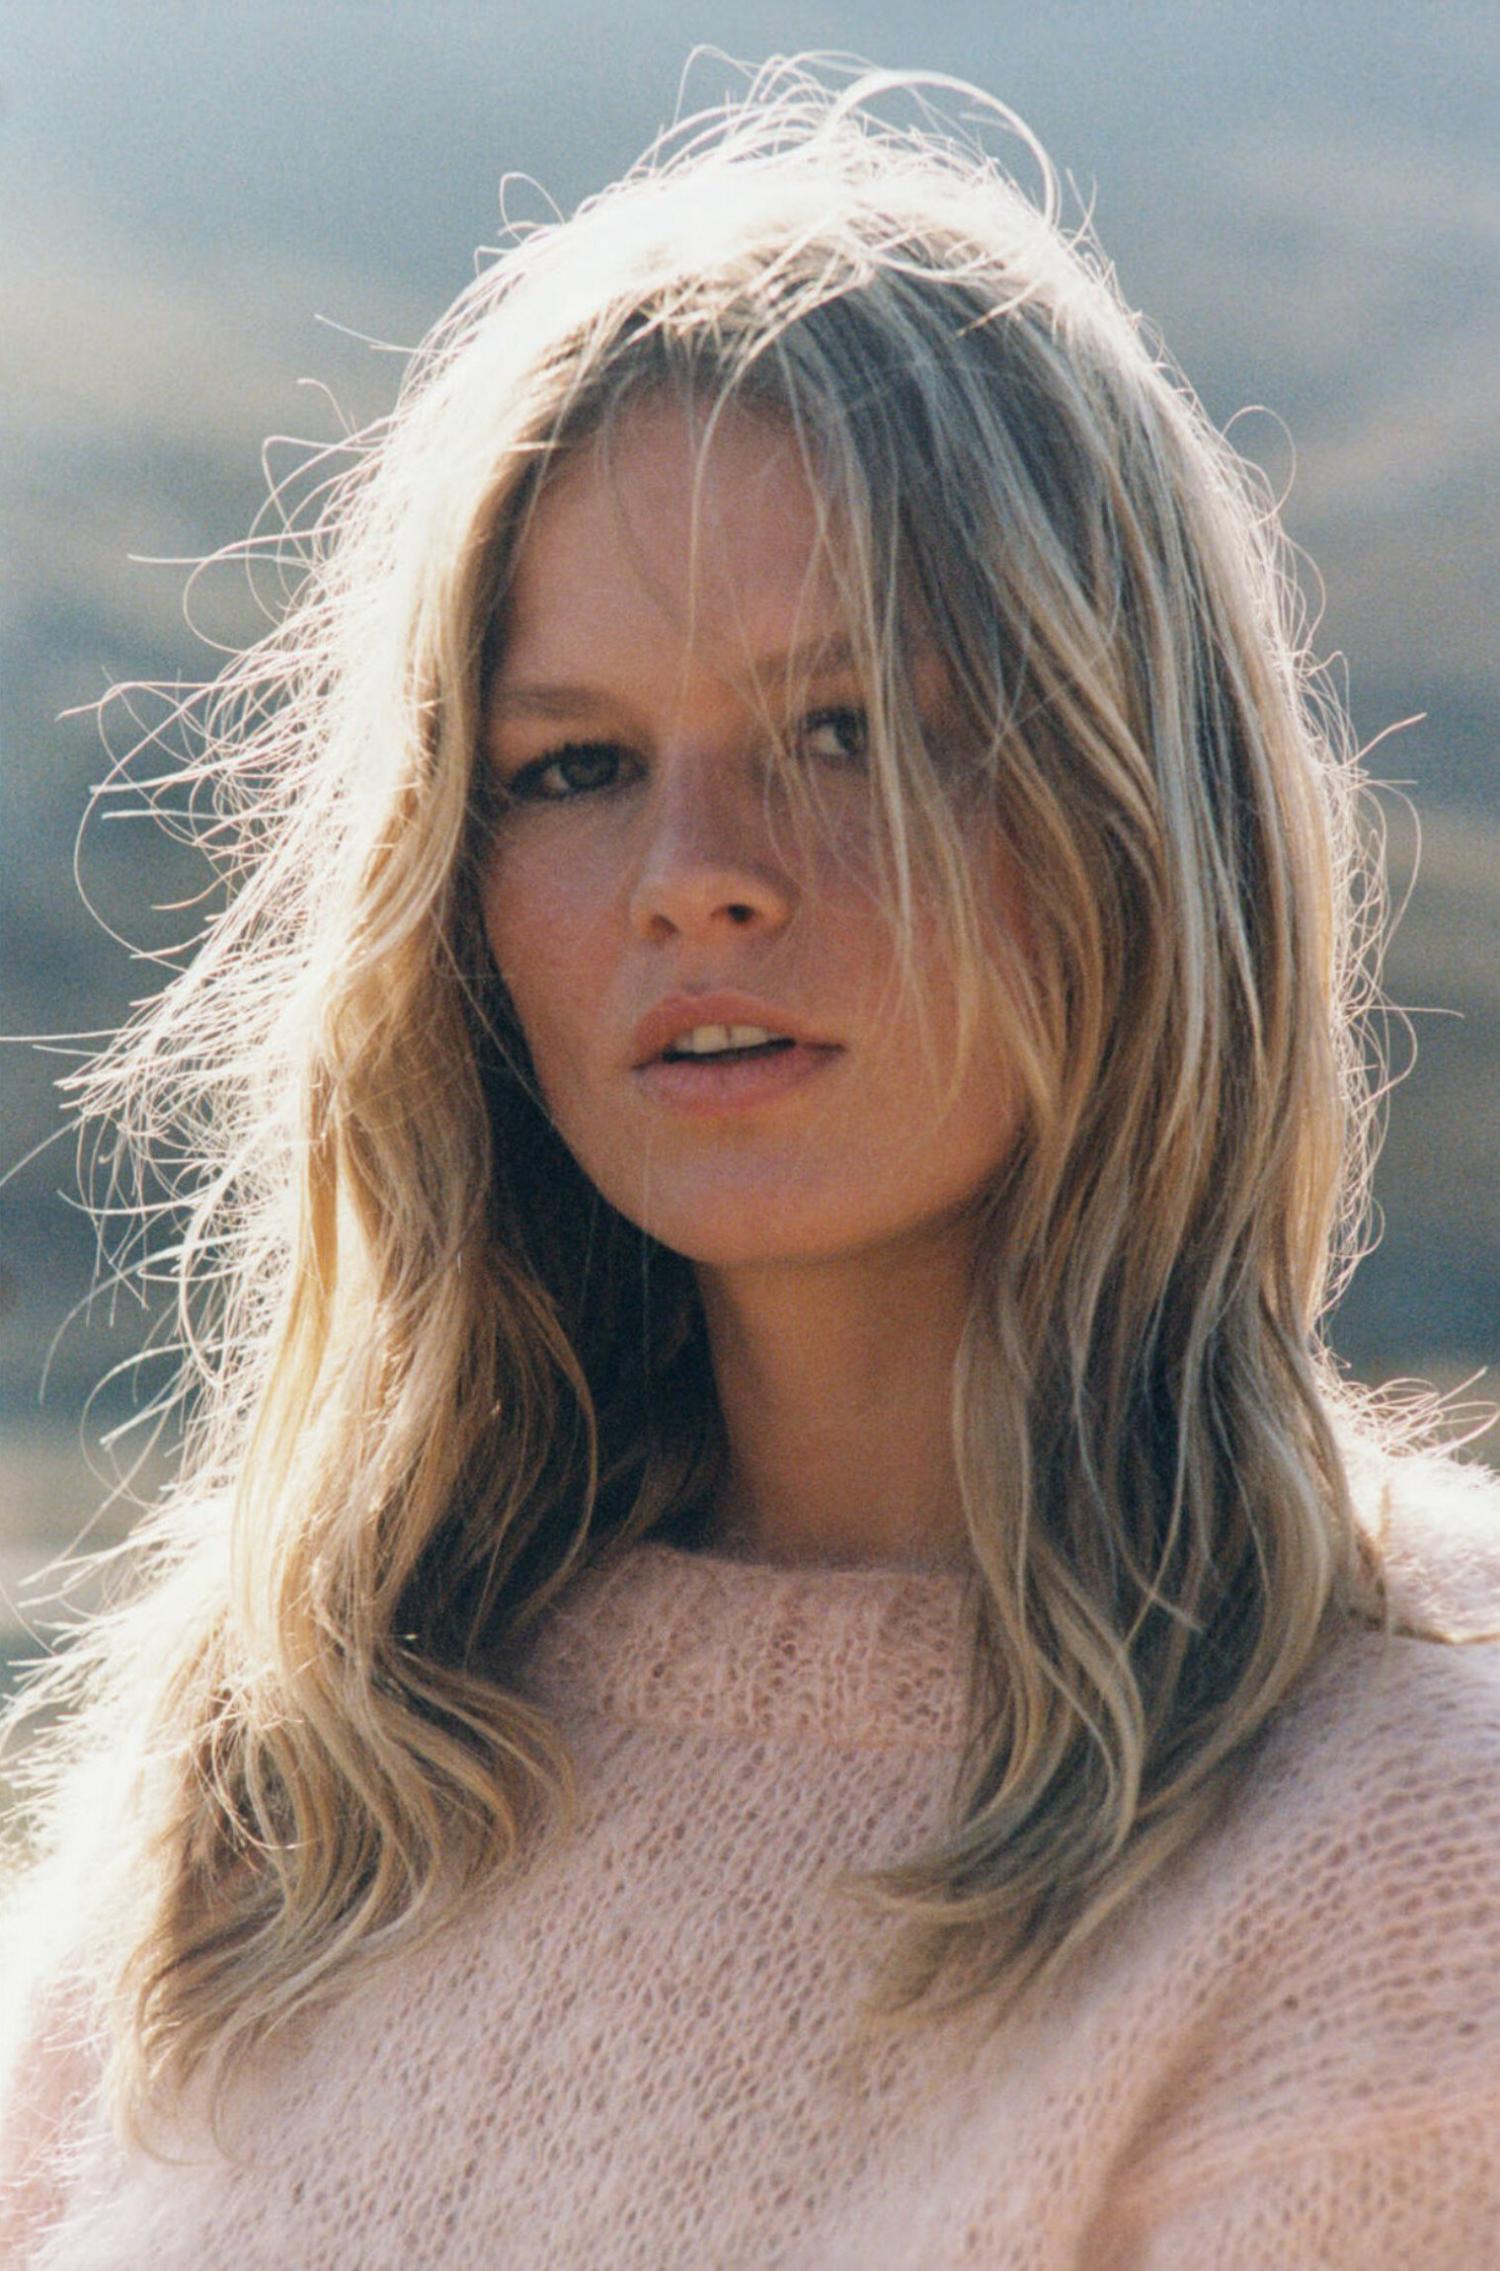 Anna Ewers in Mykonos by Henrik Purienne for Vogue Paris August 2021. Clothing: Sweater by Rose Carmine; Makeup using Dior Beauty